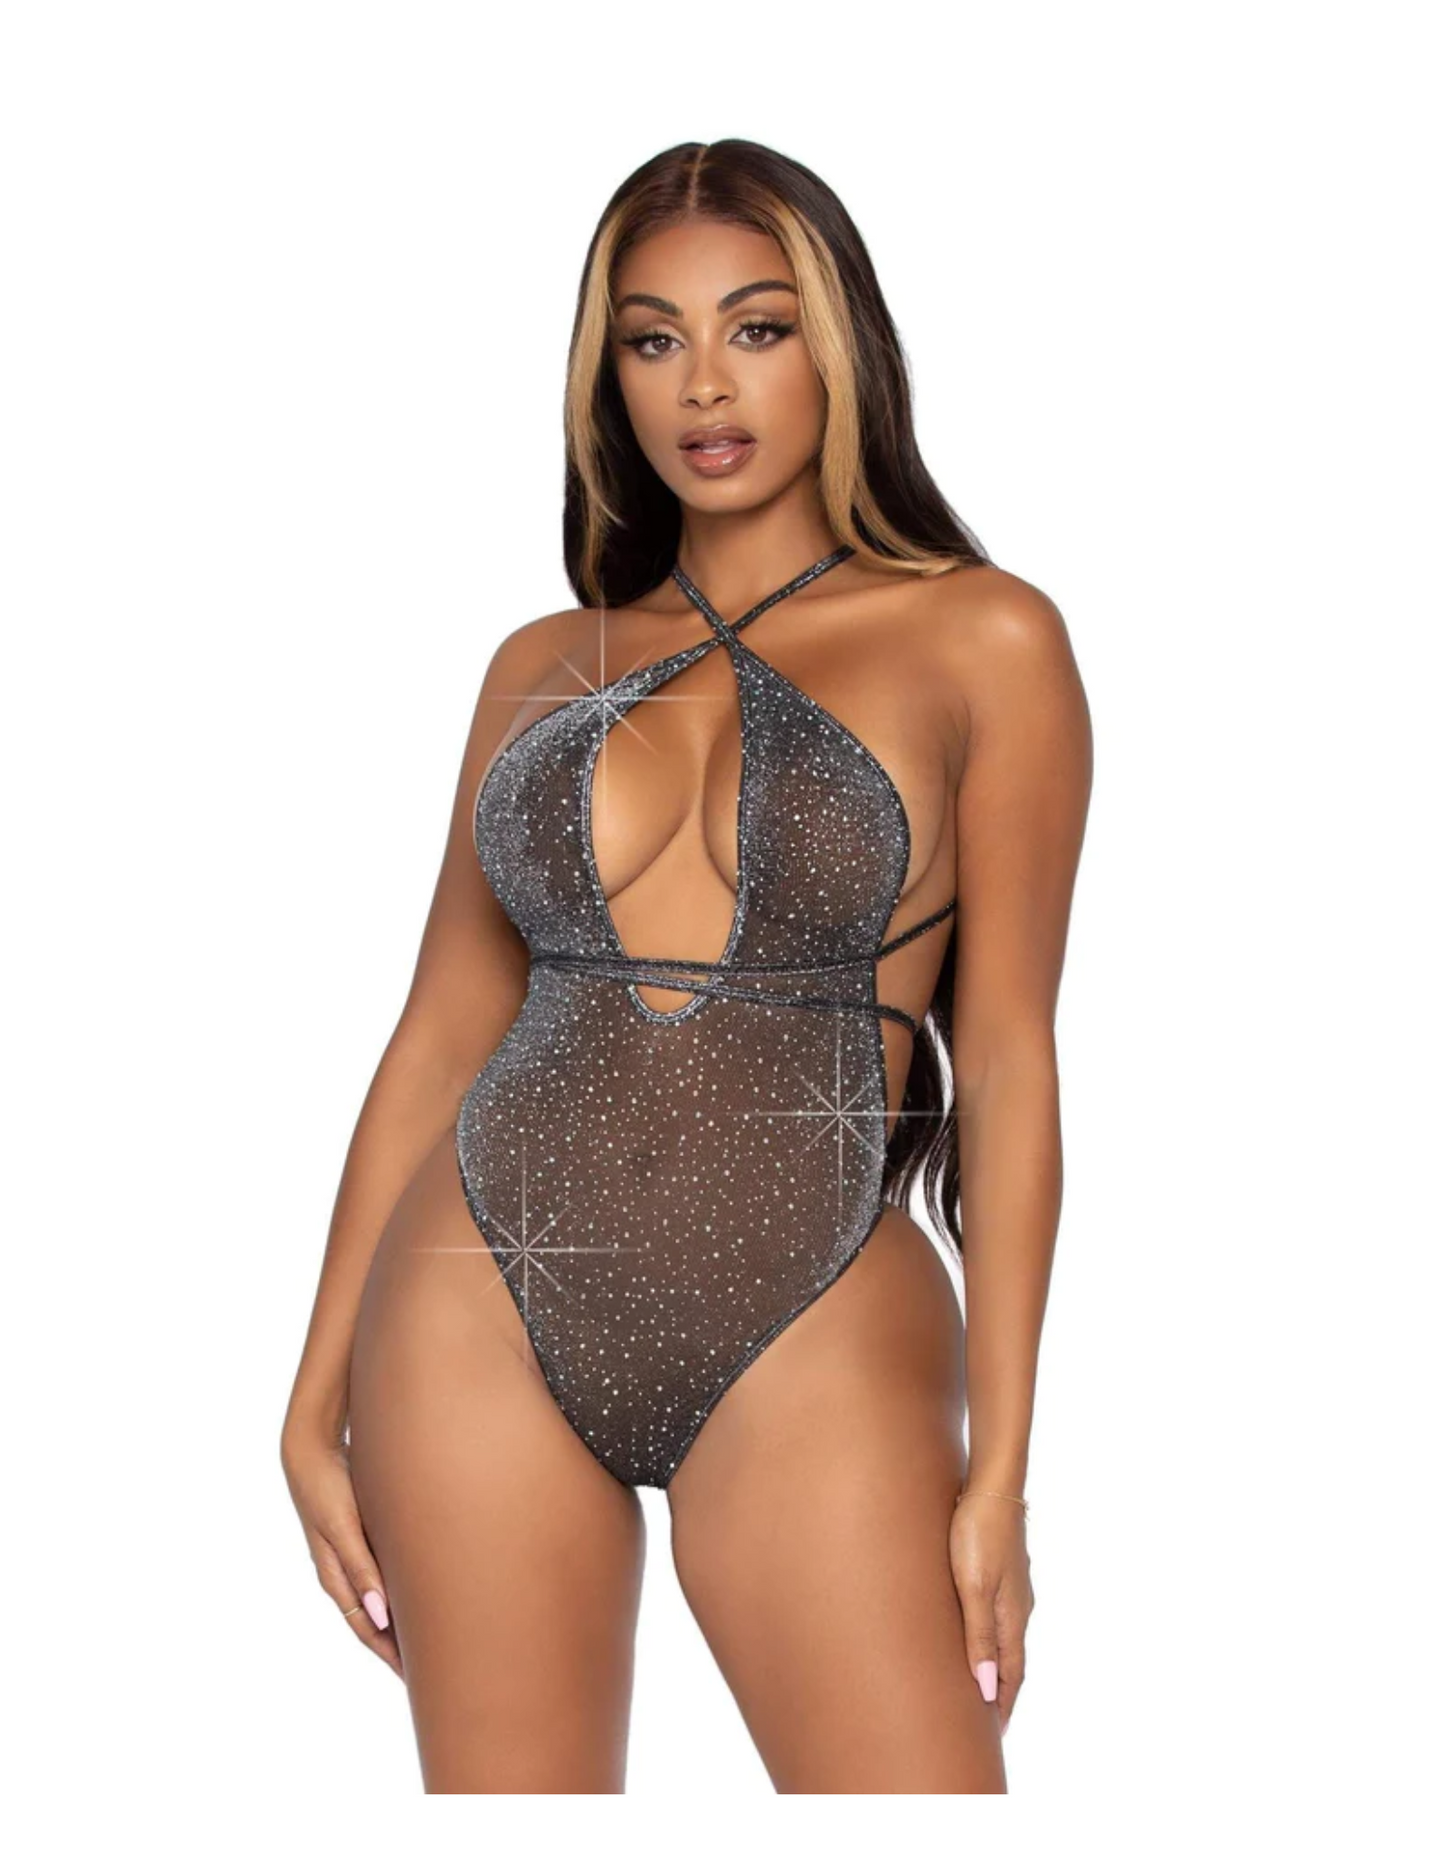 Front  photo of a model wearing the Shimmer Sheer Convertible Lurex Rhinestone Bodysuit from Leg Avenue (black, OS).